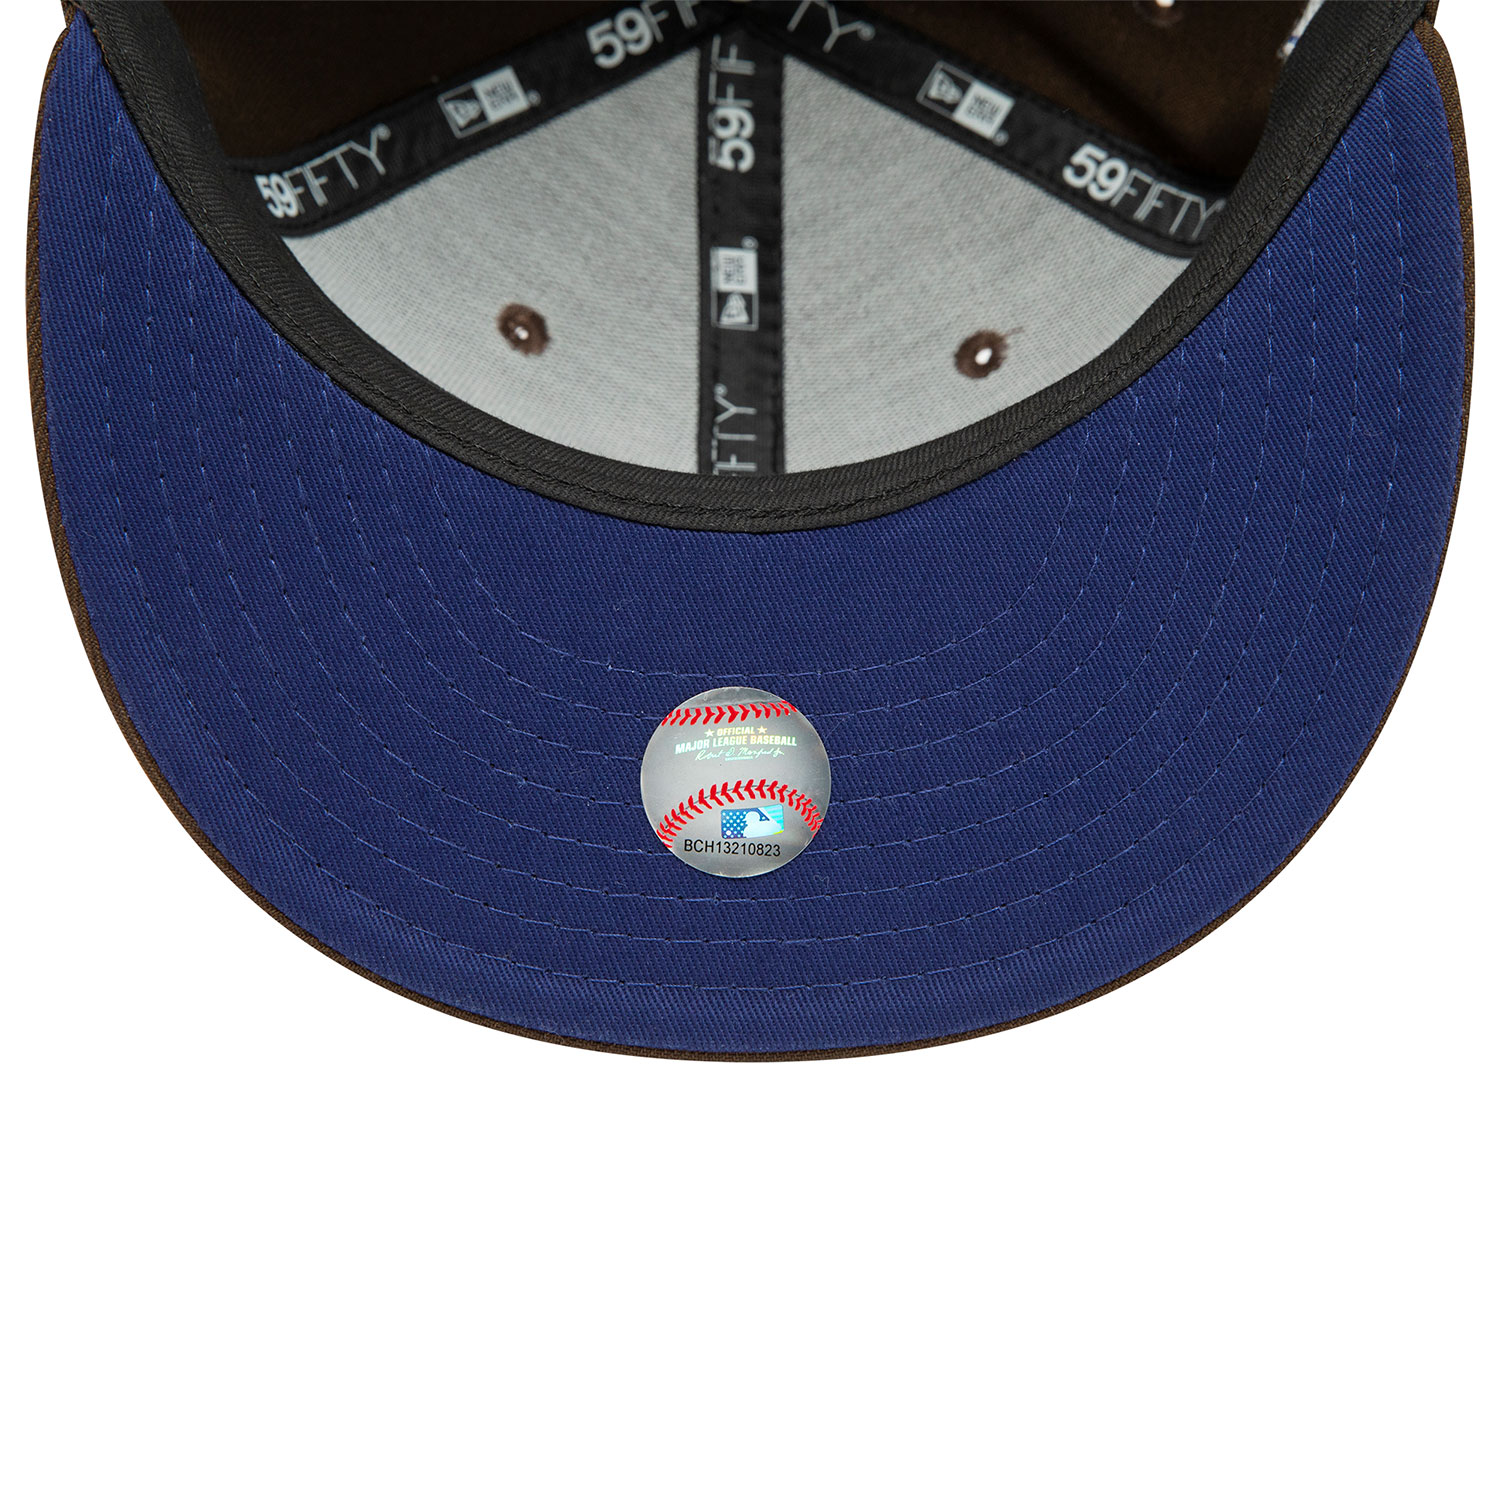 LA Dodgers Fall Colours Brown 59FIFTY Fitted Cap